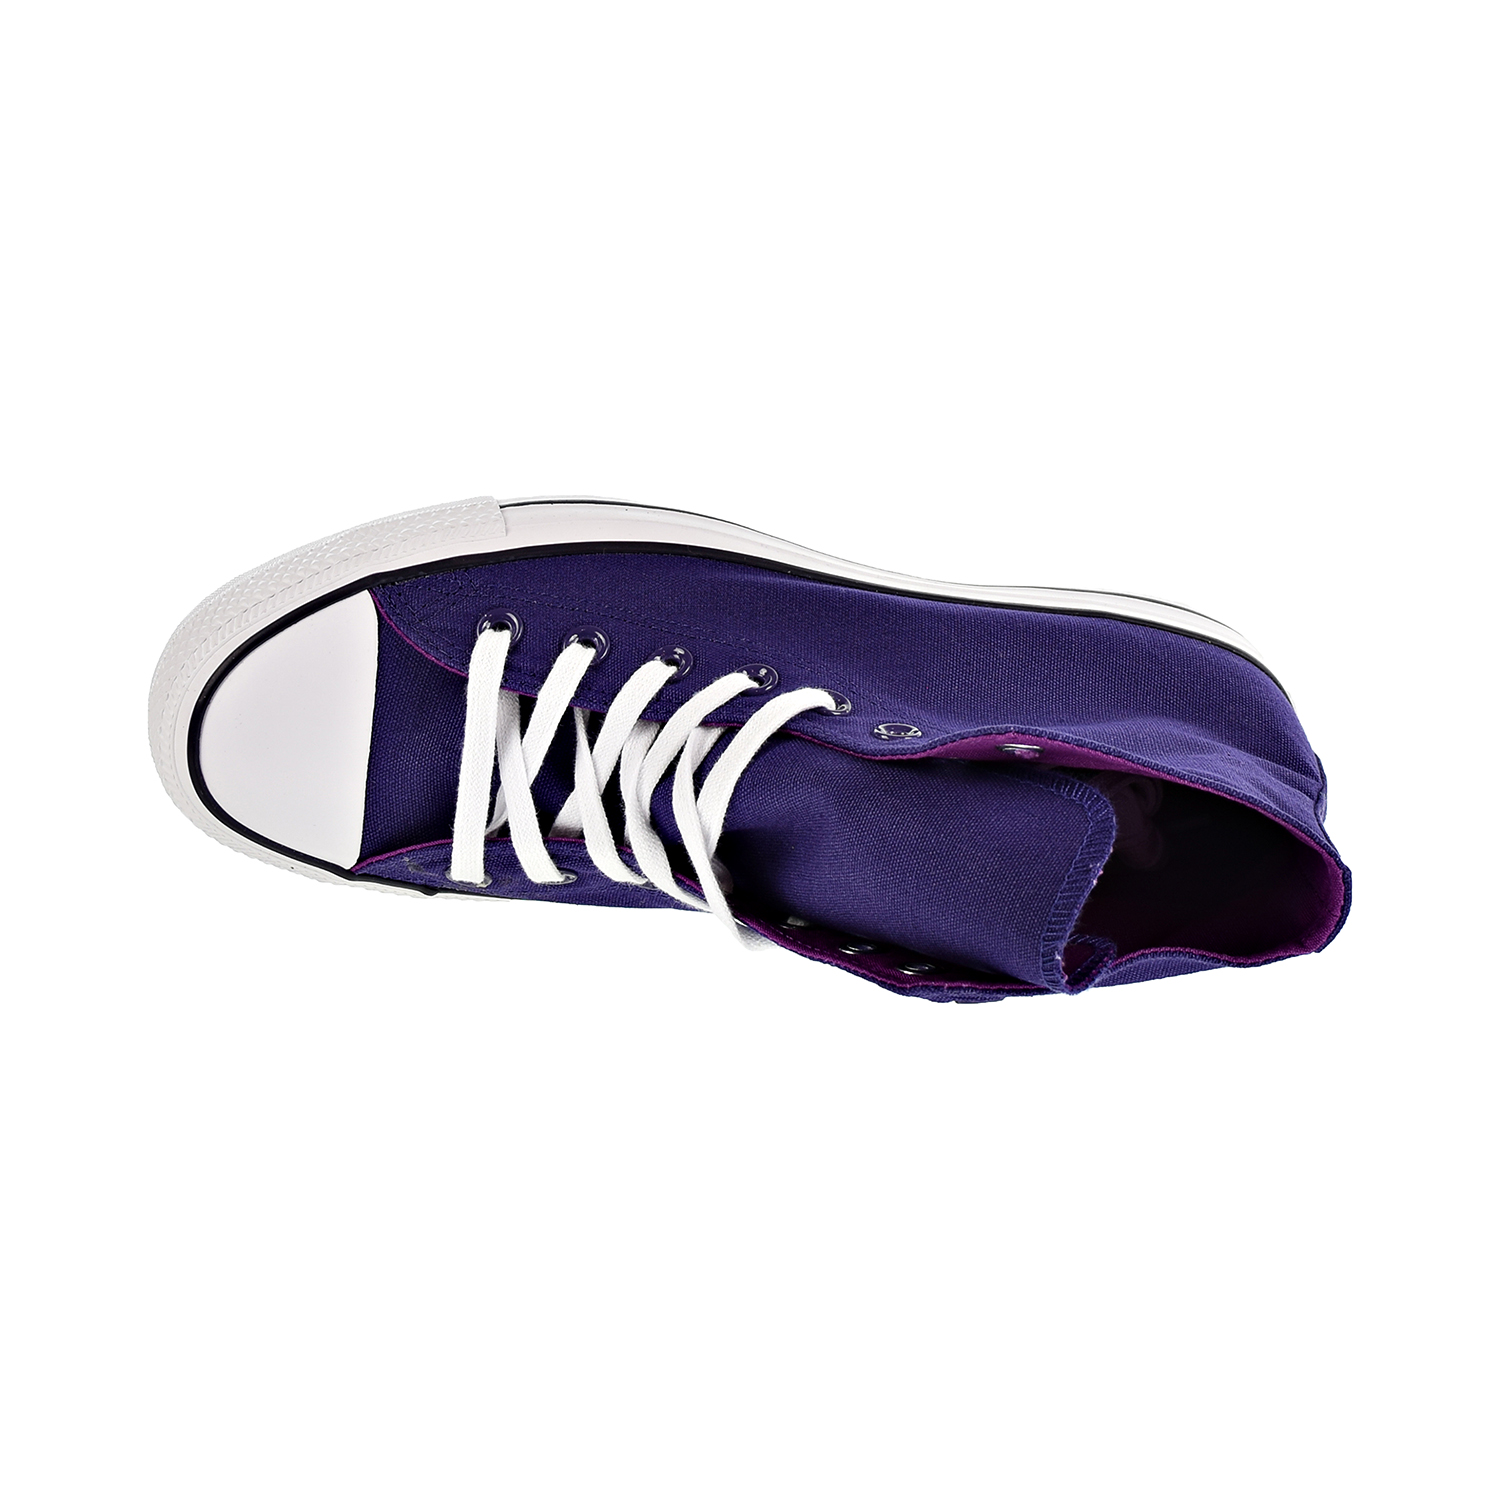 Converse Chuck Taylor All Star Seasonal Color Hi Unisex/Men's Shoes New Orchid 162450f - image 5 of 6